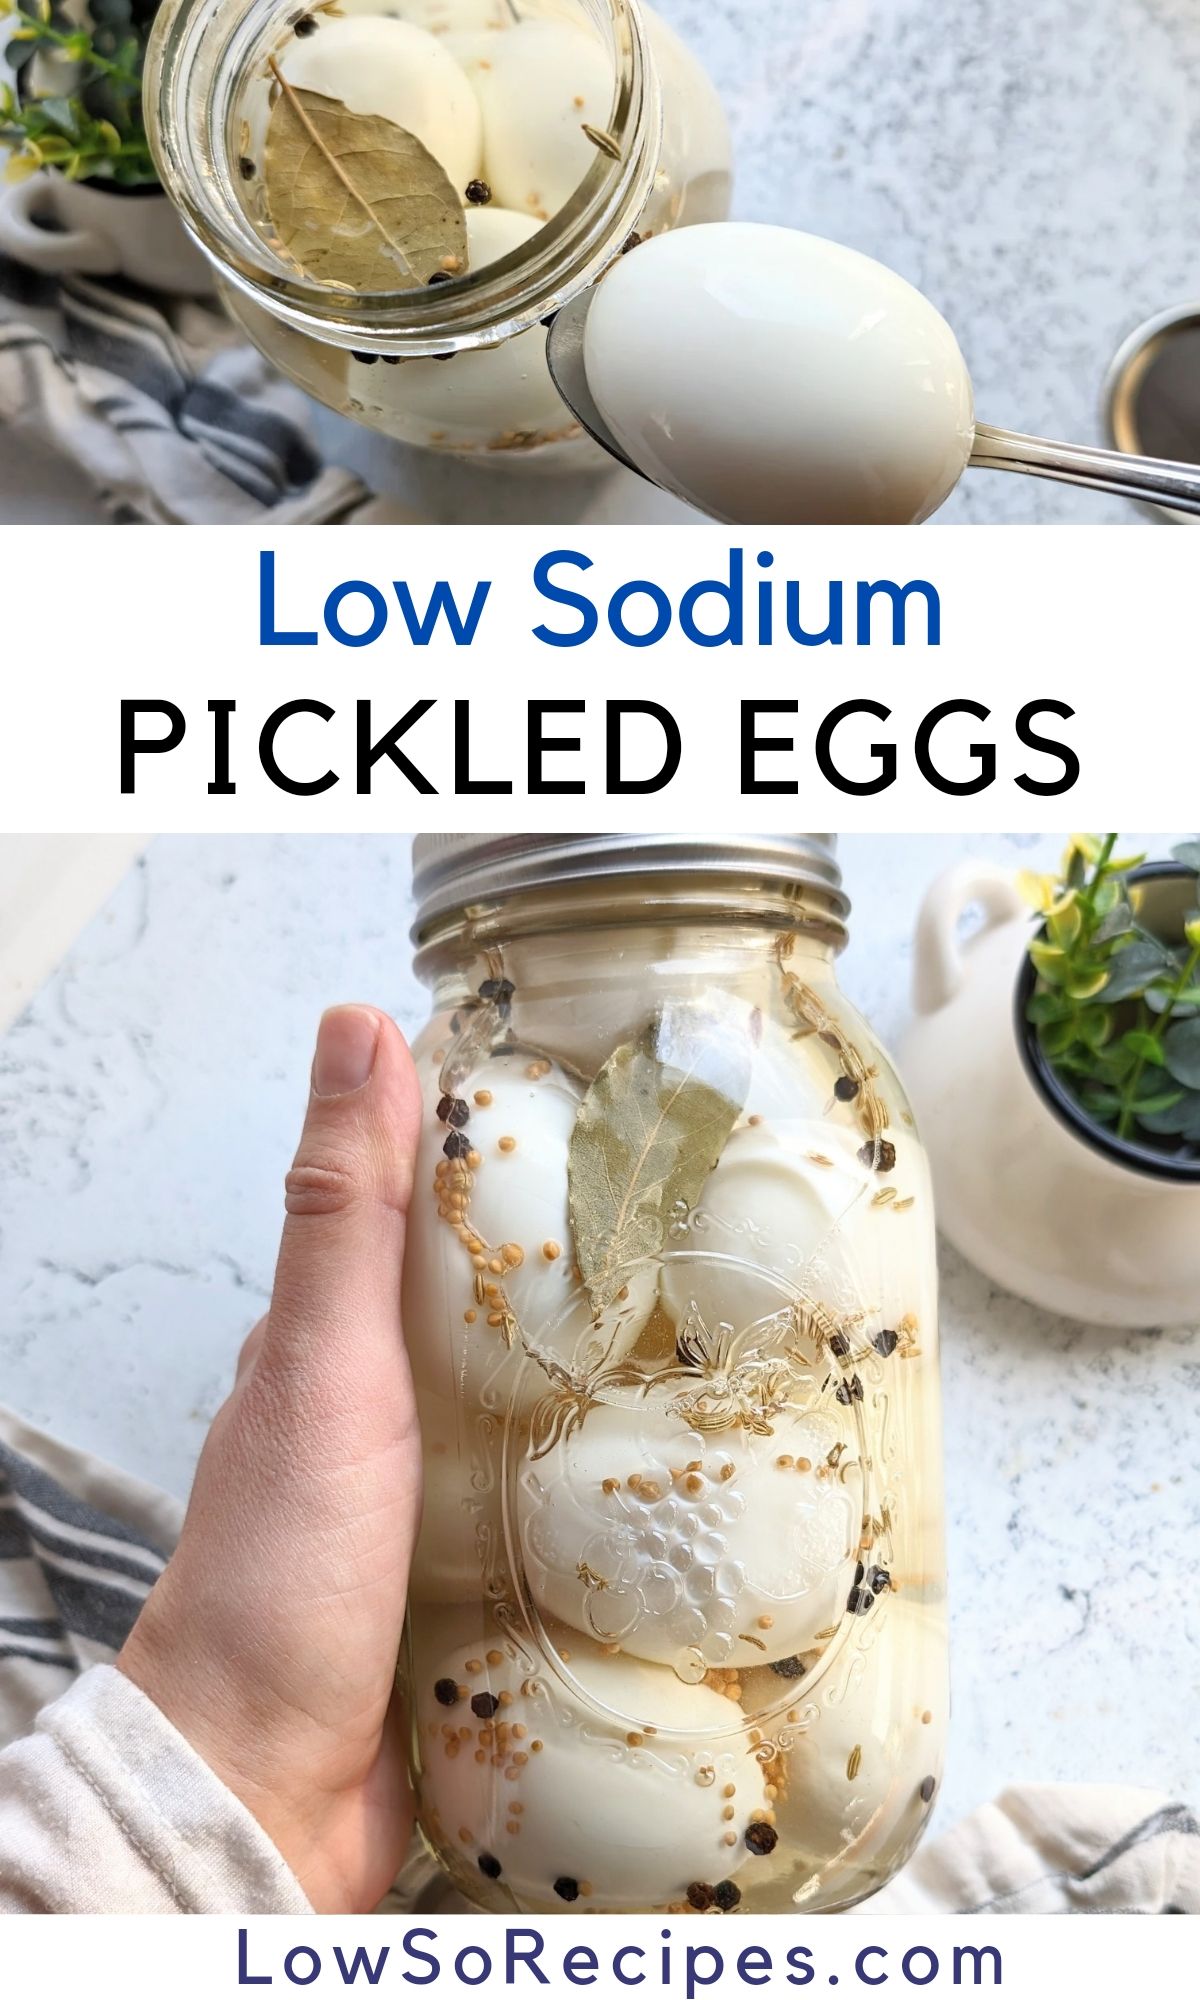 low sodium pickled eggs recipe low salt pickle recipes easy pickled eggs without salt low sodium high protein keto recipes